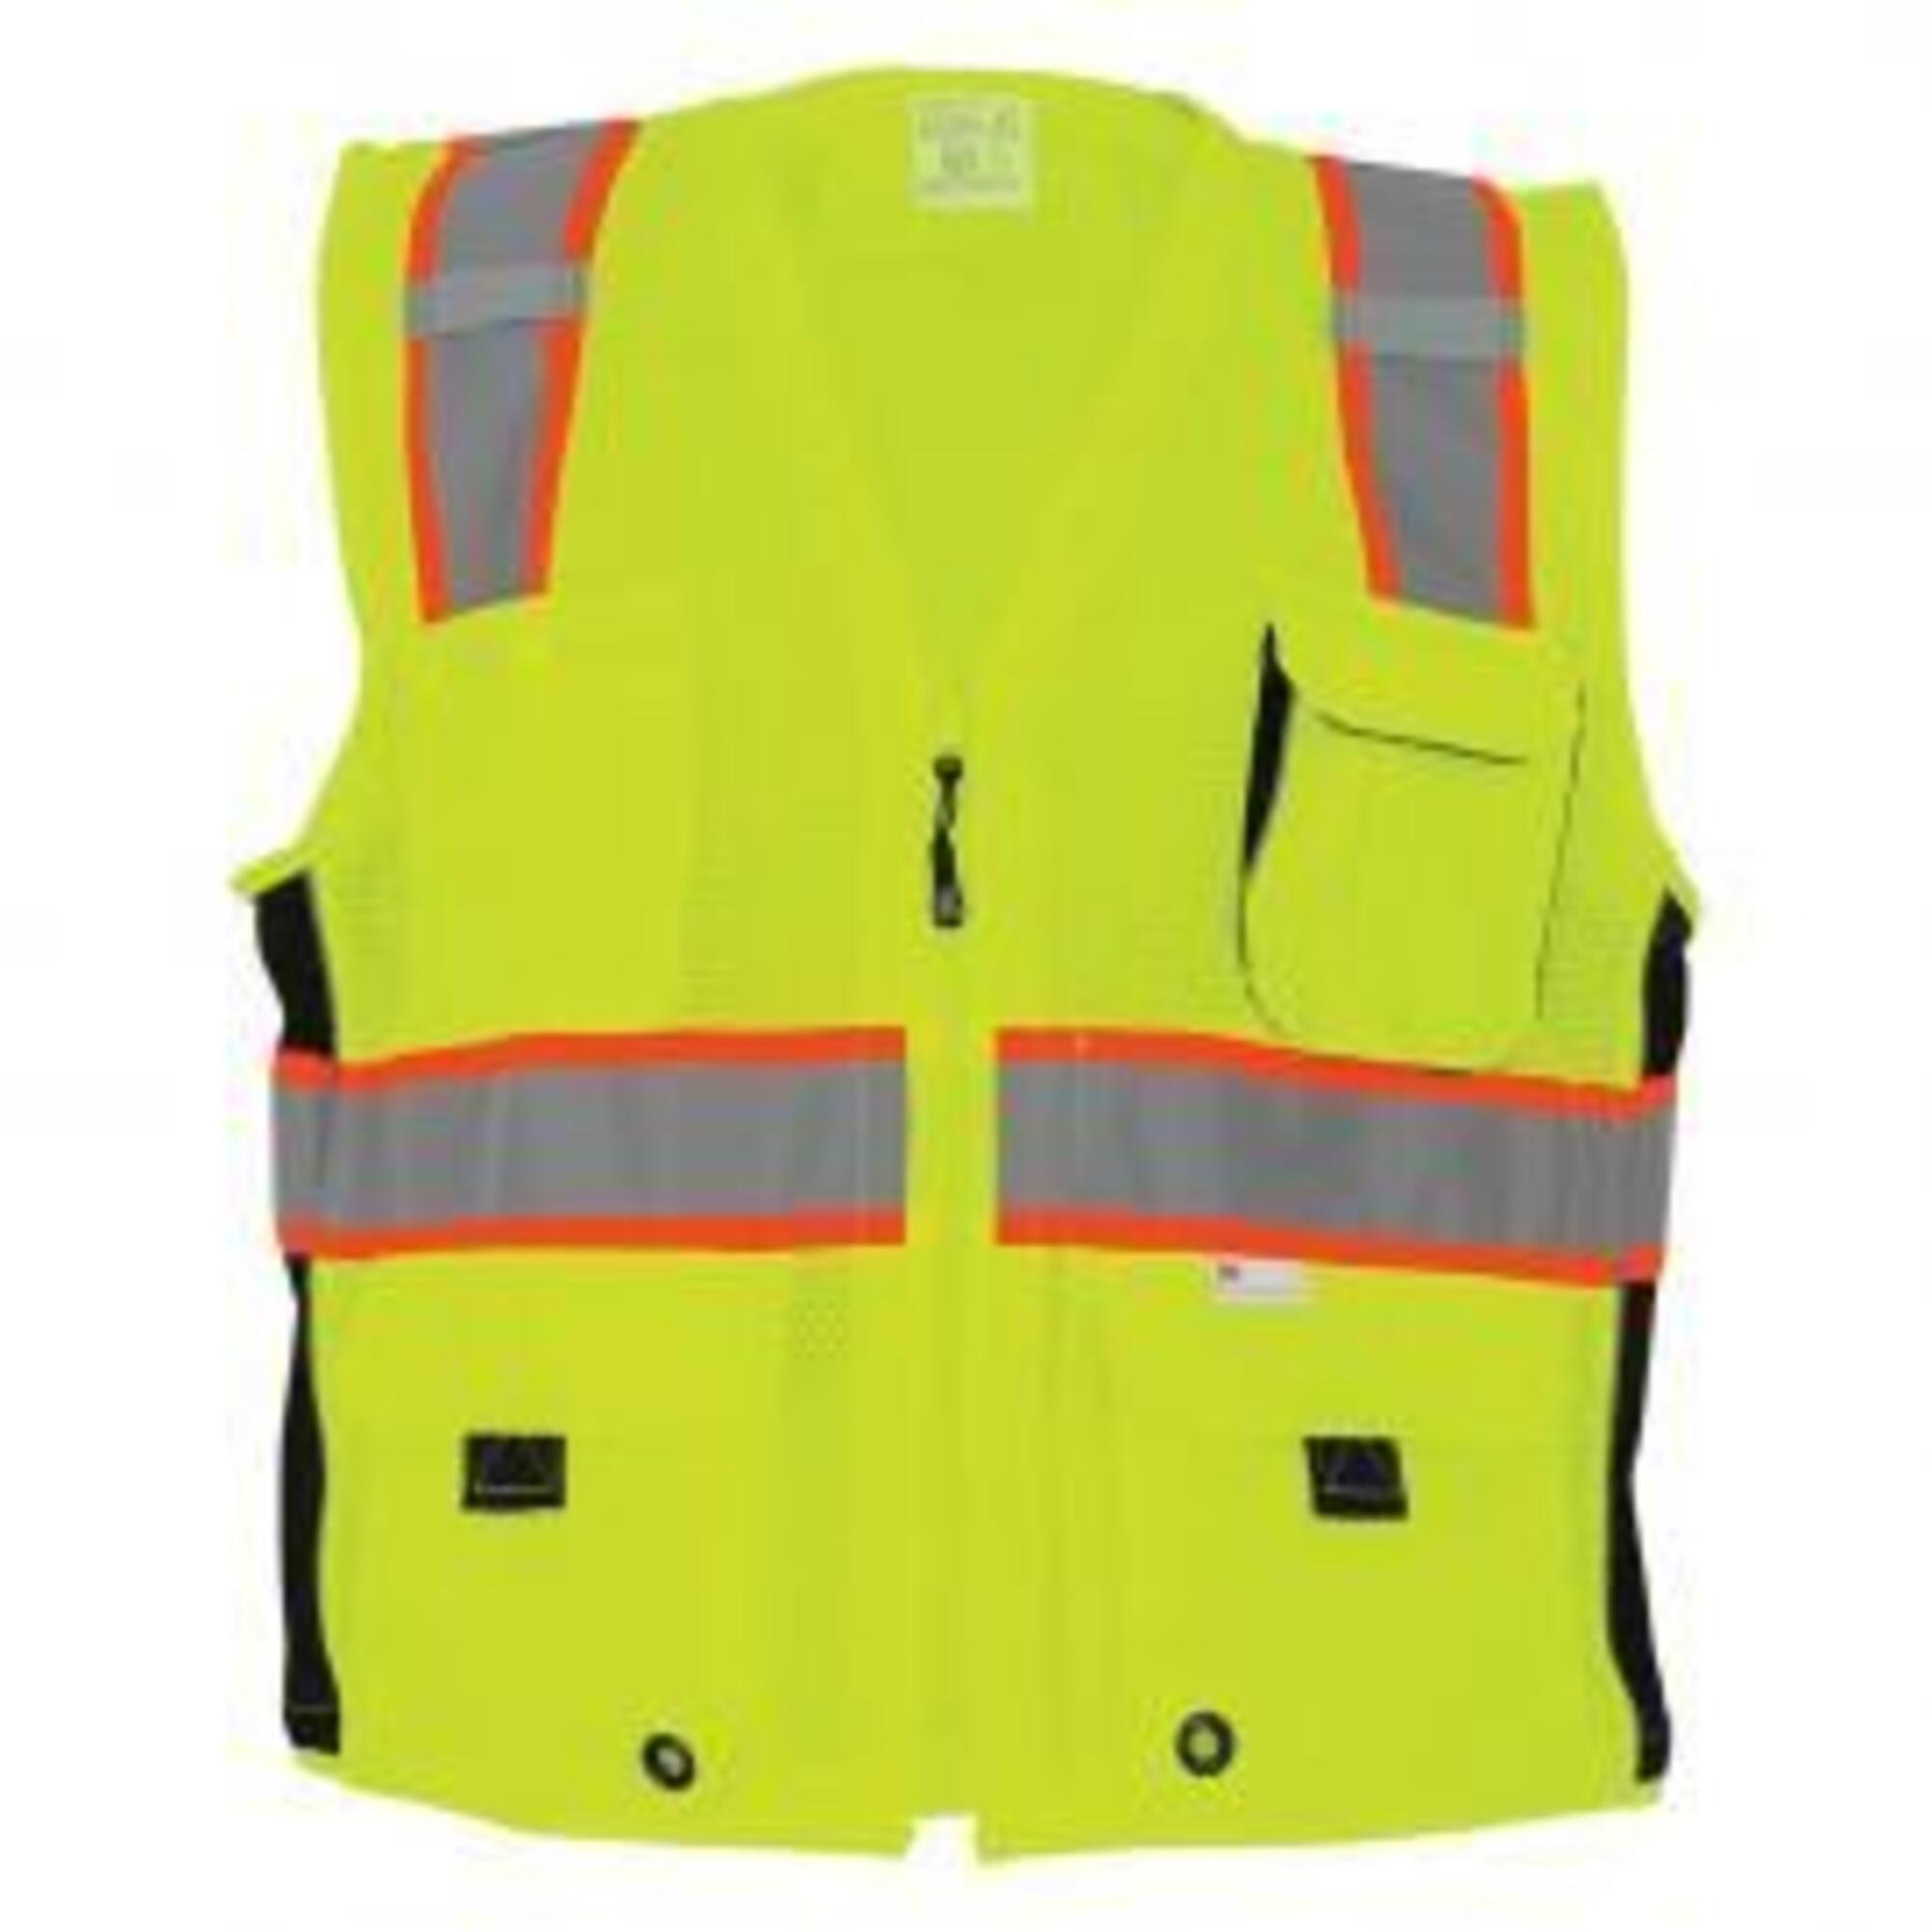 FrogWear, HV Yellow/Green, Class 2 6 Pocket, Mesh Vest, Size S, Color High-Visibility Yellow/Green/Black, Model GLO-079-S